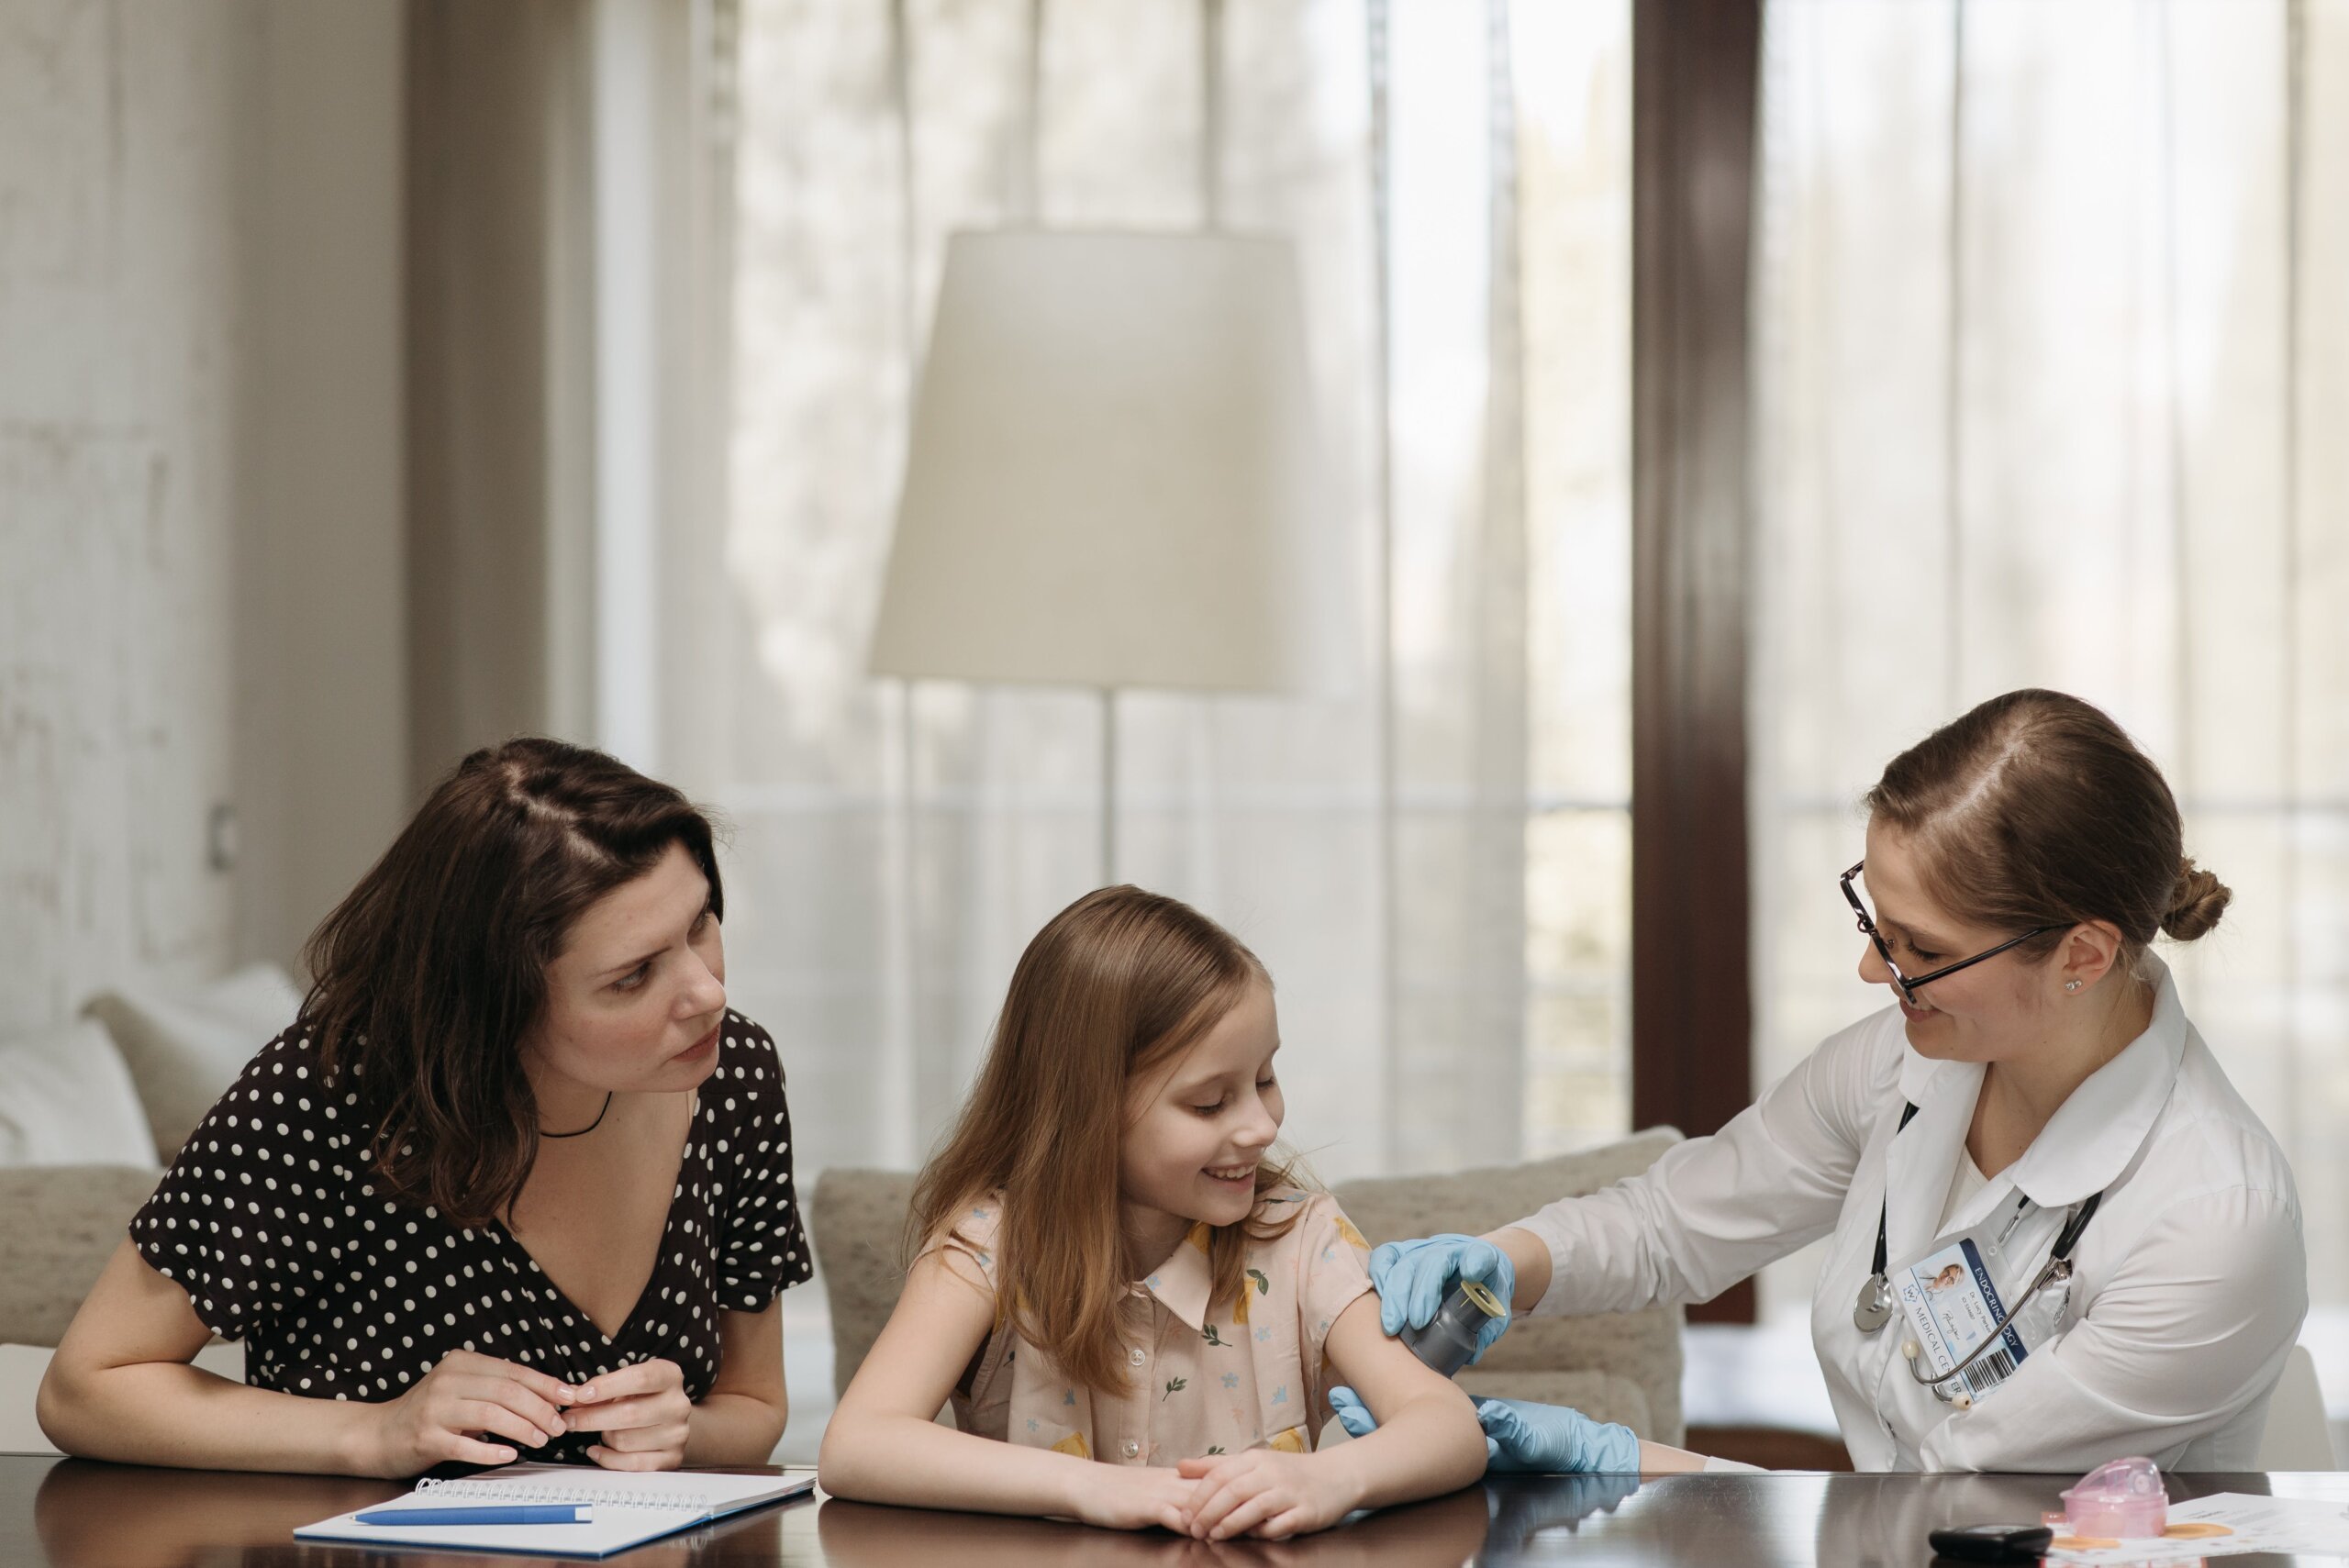 A health care professional sitting at a table with a mother and daughter